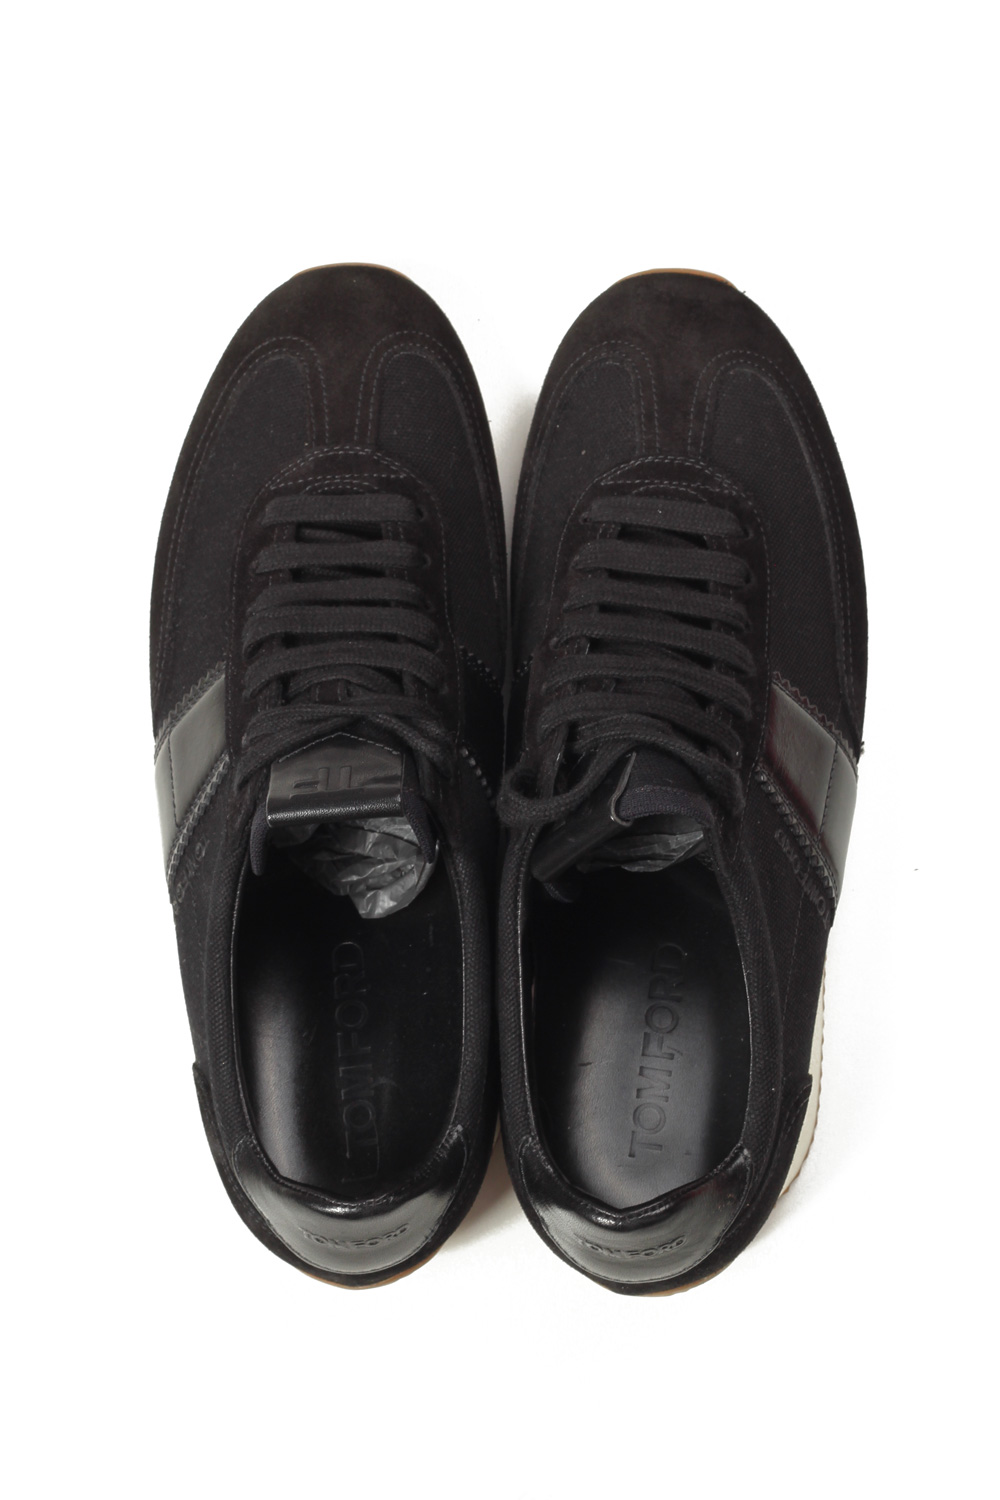 TOM FORD Orford Colorblock Black Trainer Sneaker Shoes Size 7 UK / 8 U.S. | Costume Limité